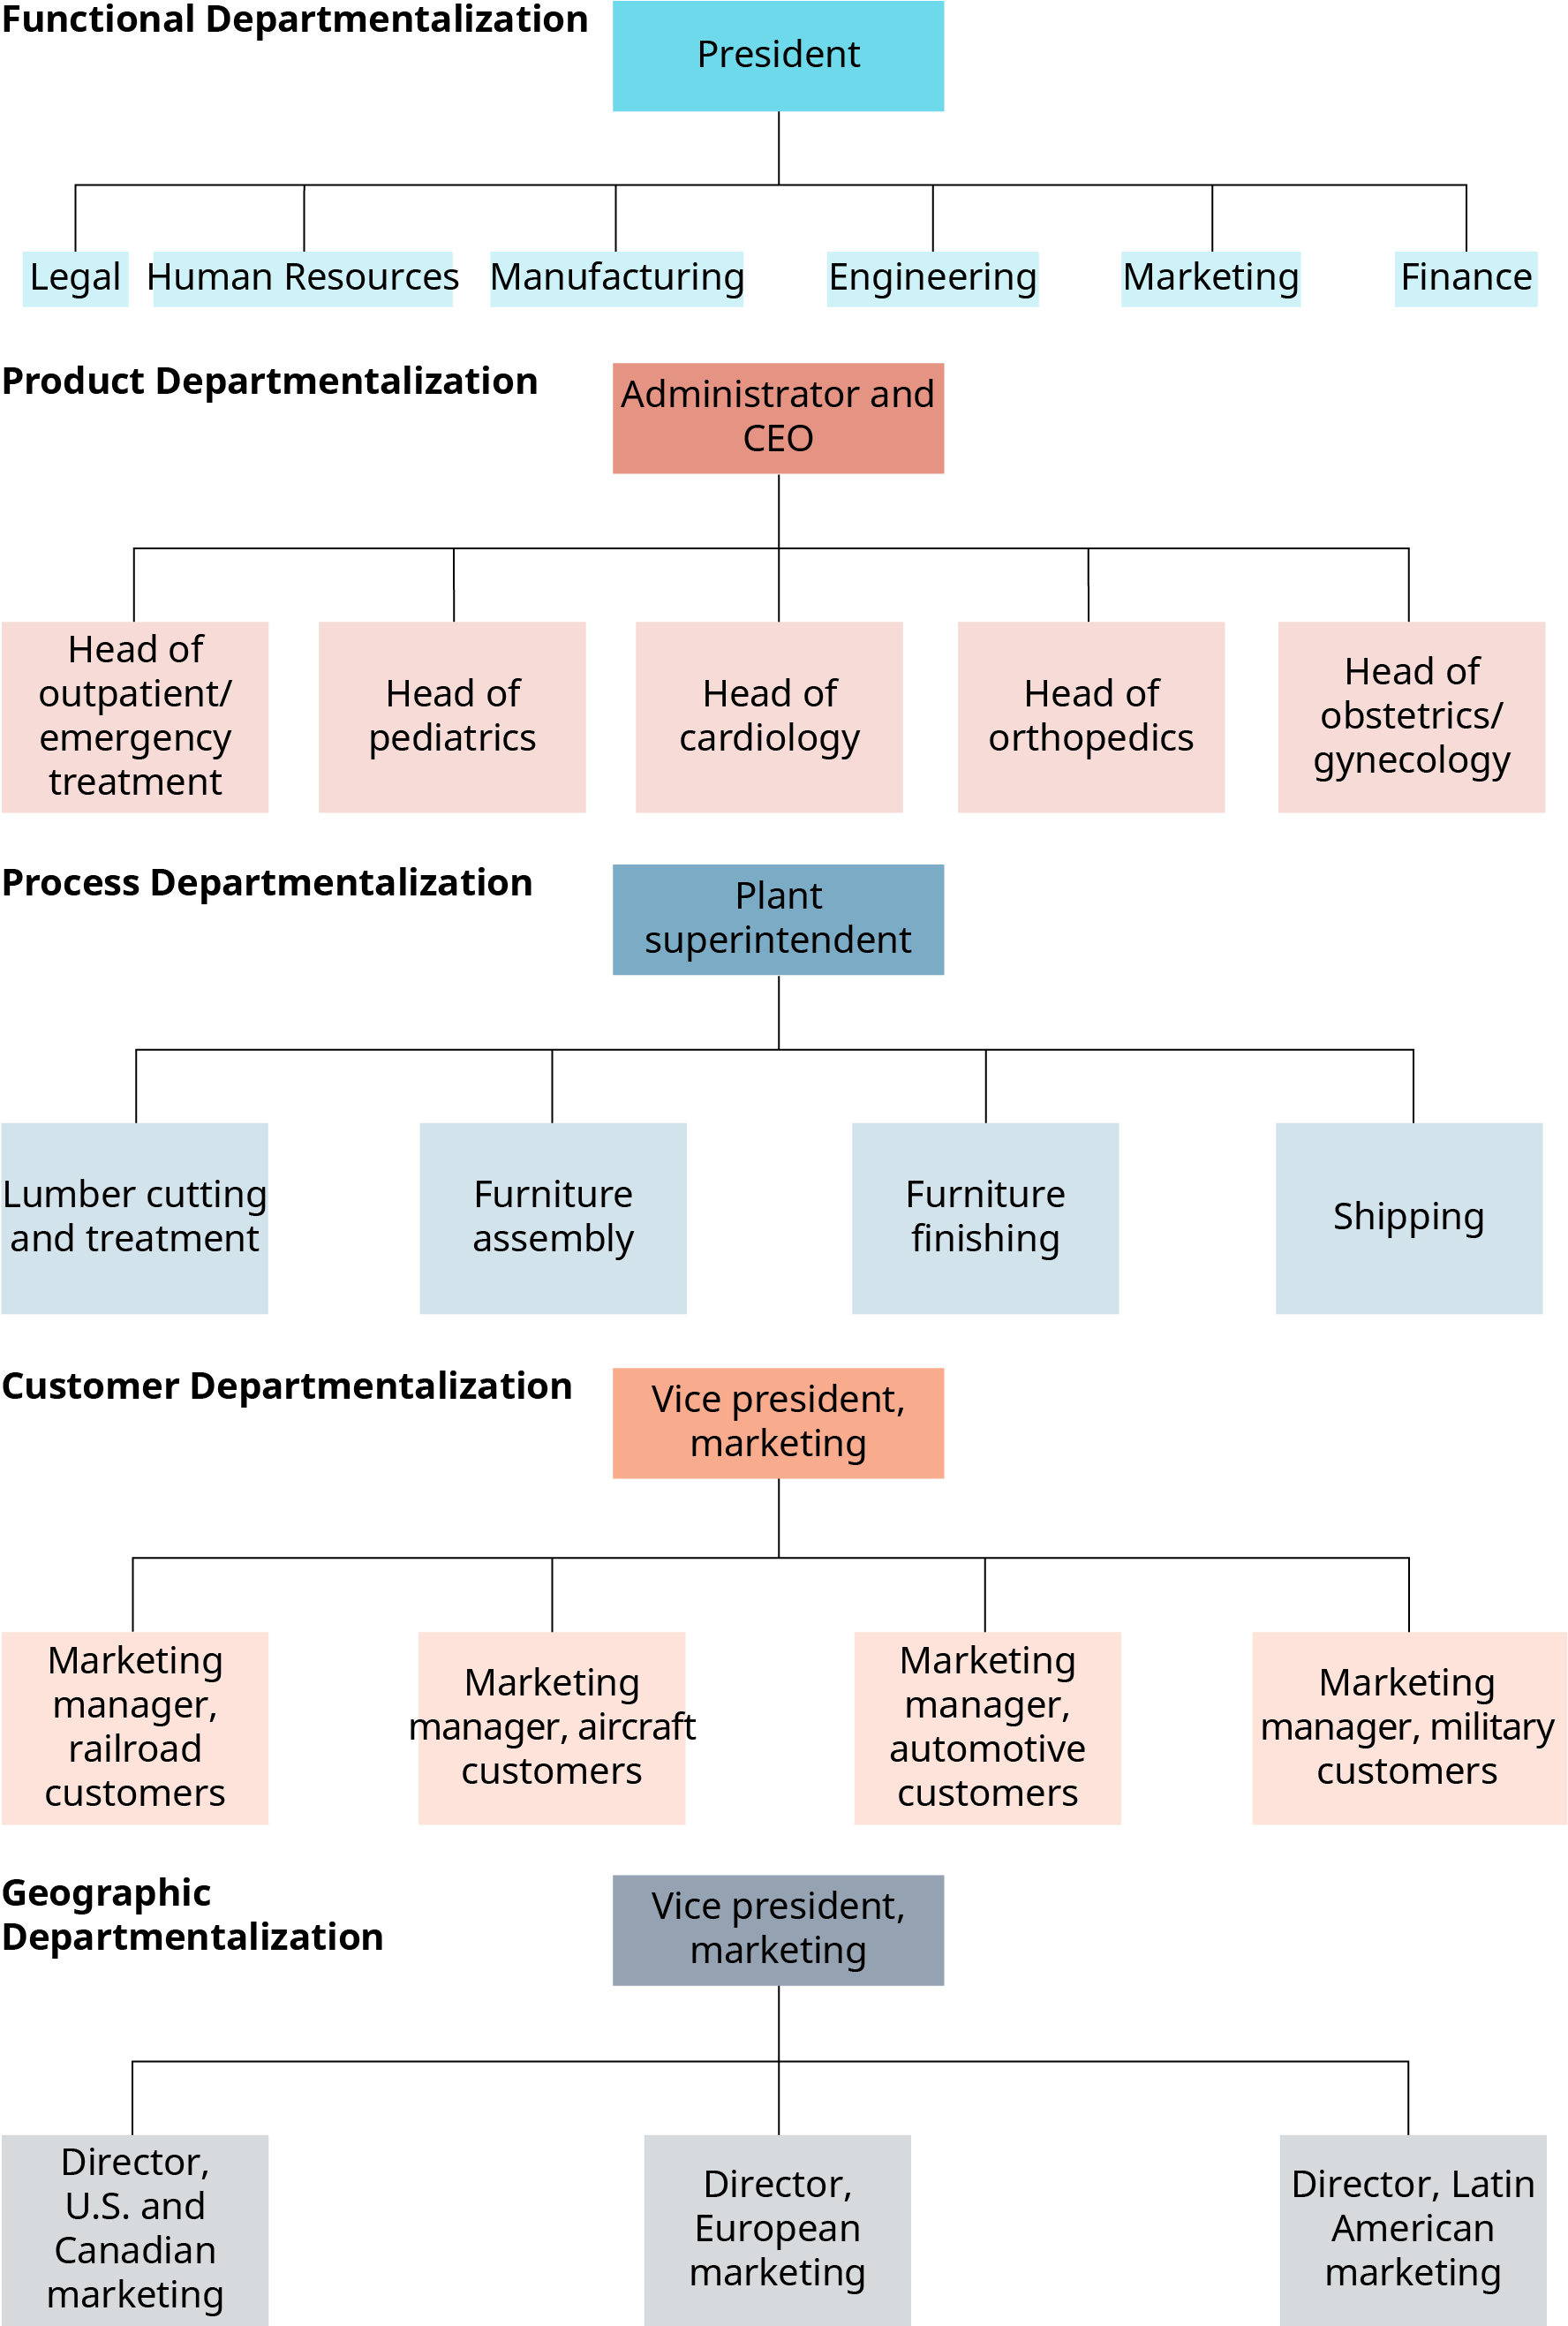 Functional departmentalization shows a president, with lines extending to legal, human resources, manufacturing, engineering, marketing, and finance. Product departmentalization shows an administrator and C E O, with lines extending to head of outpatient slash emergency treatment, head of pediatrics, head of cardiology, head of orthopedics, and head of obstetrics slash gynecology. Process departmentalization shows a plant superintendent with lines extending to lumber cutting and treatment, furniture assembly, furniture finishing, and shipping. Customer departmentalization shows the vice president of marketing, with lines extending to marketing manager, railroad customers; and marketing manager, aircraft customers; and marketing manager, automotive customers, and marketing manager, military customers. Geographic departmentalization shows the vice president of marketing, with lines extending to the director, U S and Canadian marketing; and director, European marketing; and director, Latin American marketing.